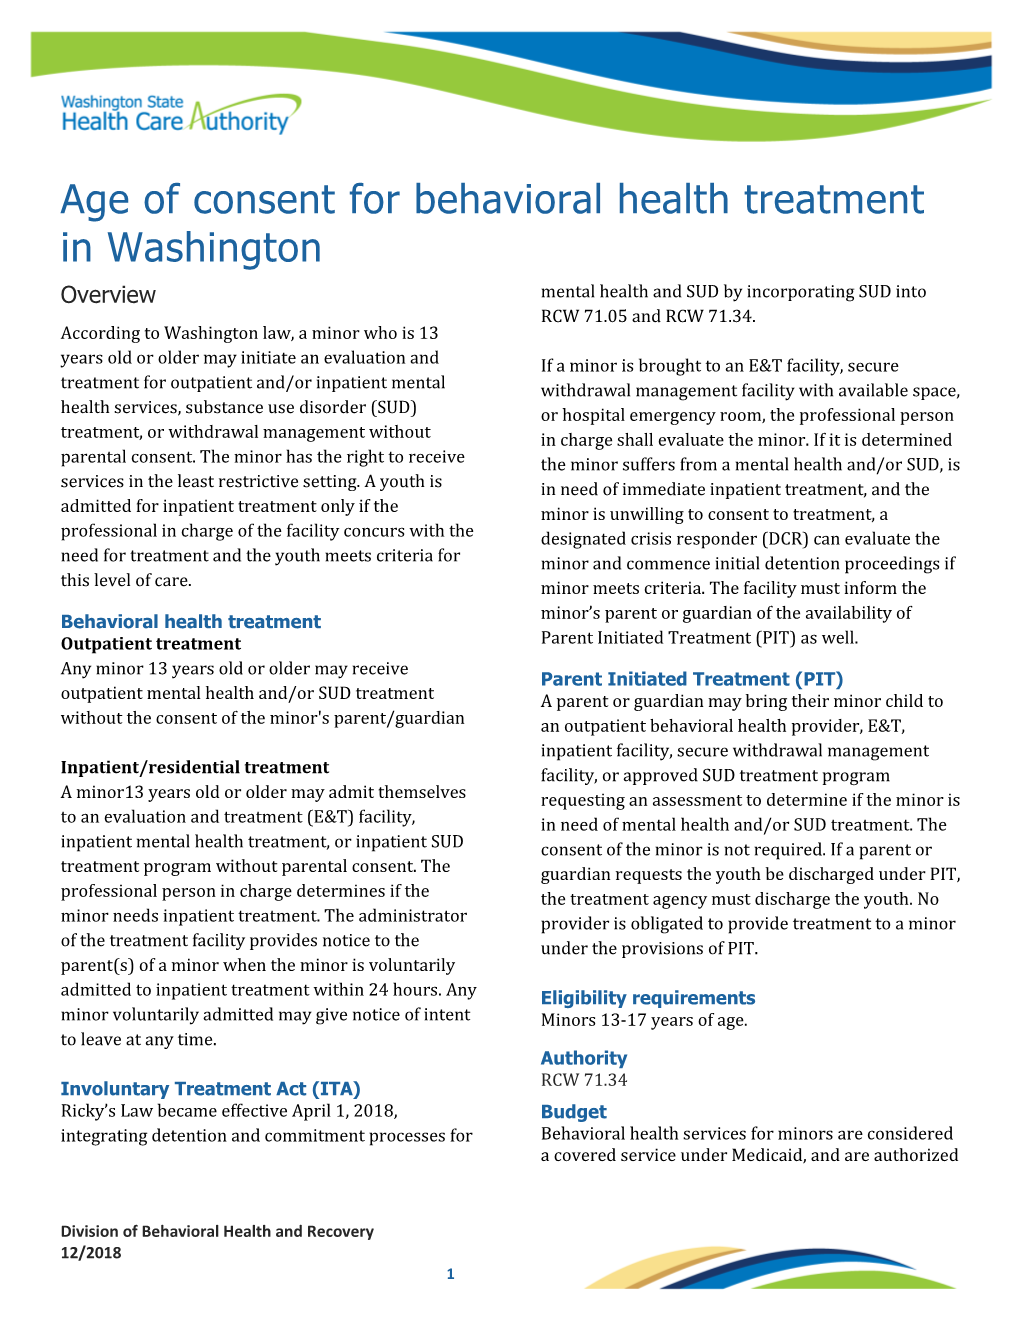 Age of Consent for Behavioral Health Treatment Fact Sheet